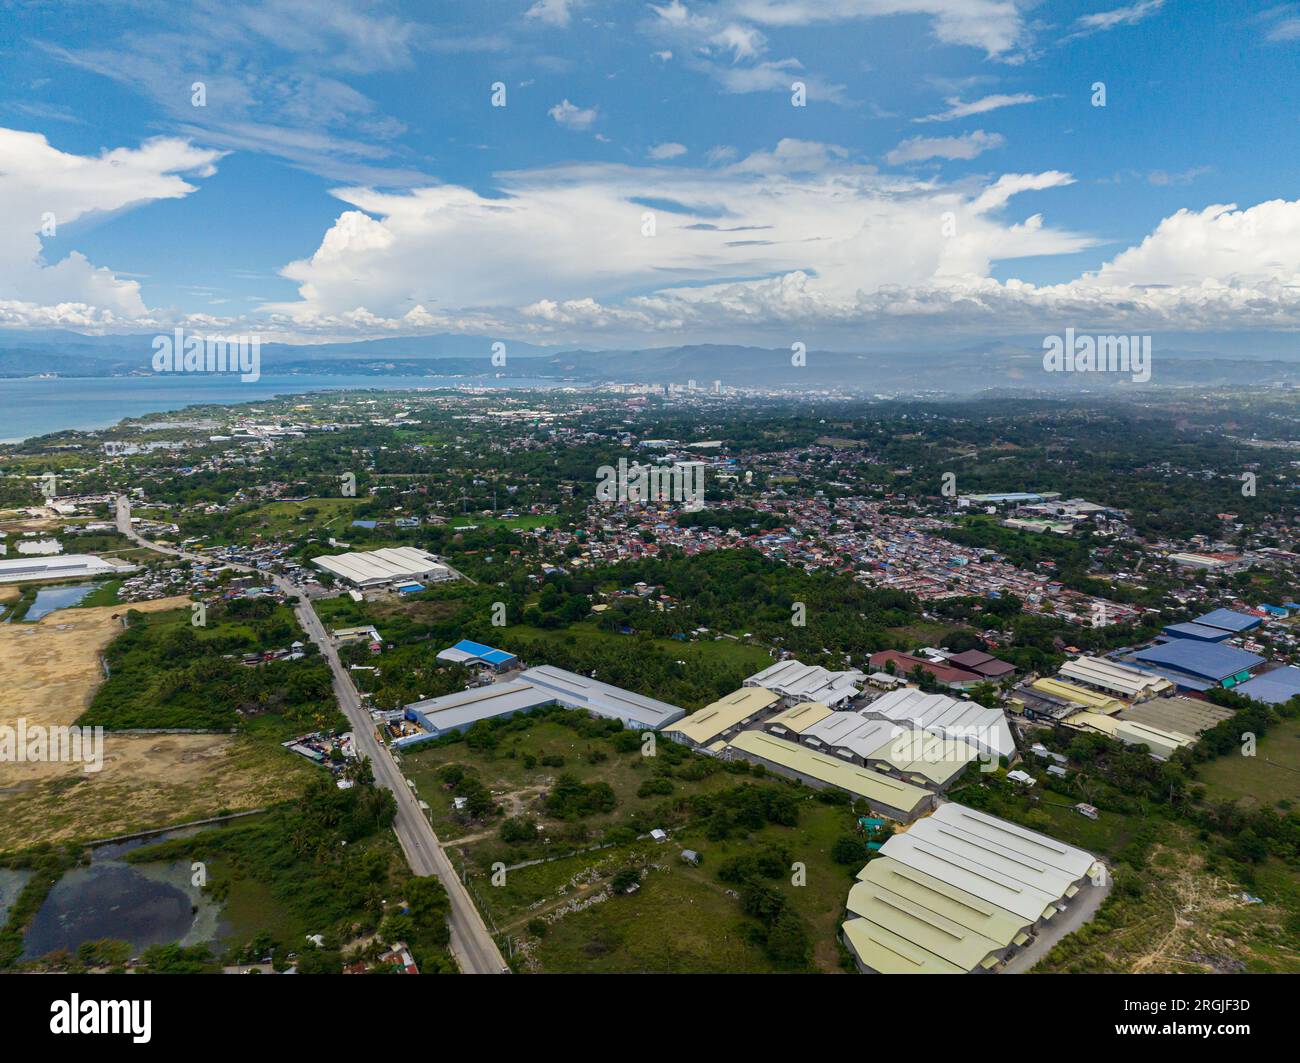 Cagayan de Oro: Busy city in daytime, residential area and commercial buildings. Northern Mindanao, Philippines. Cityscape. Stock Photo